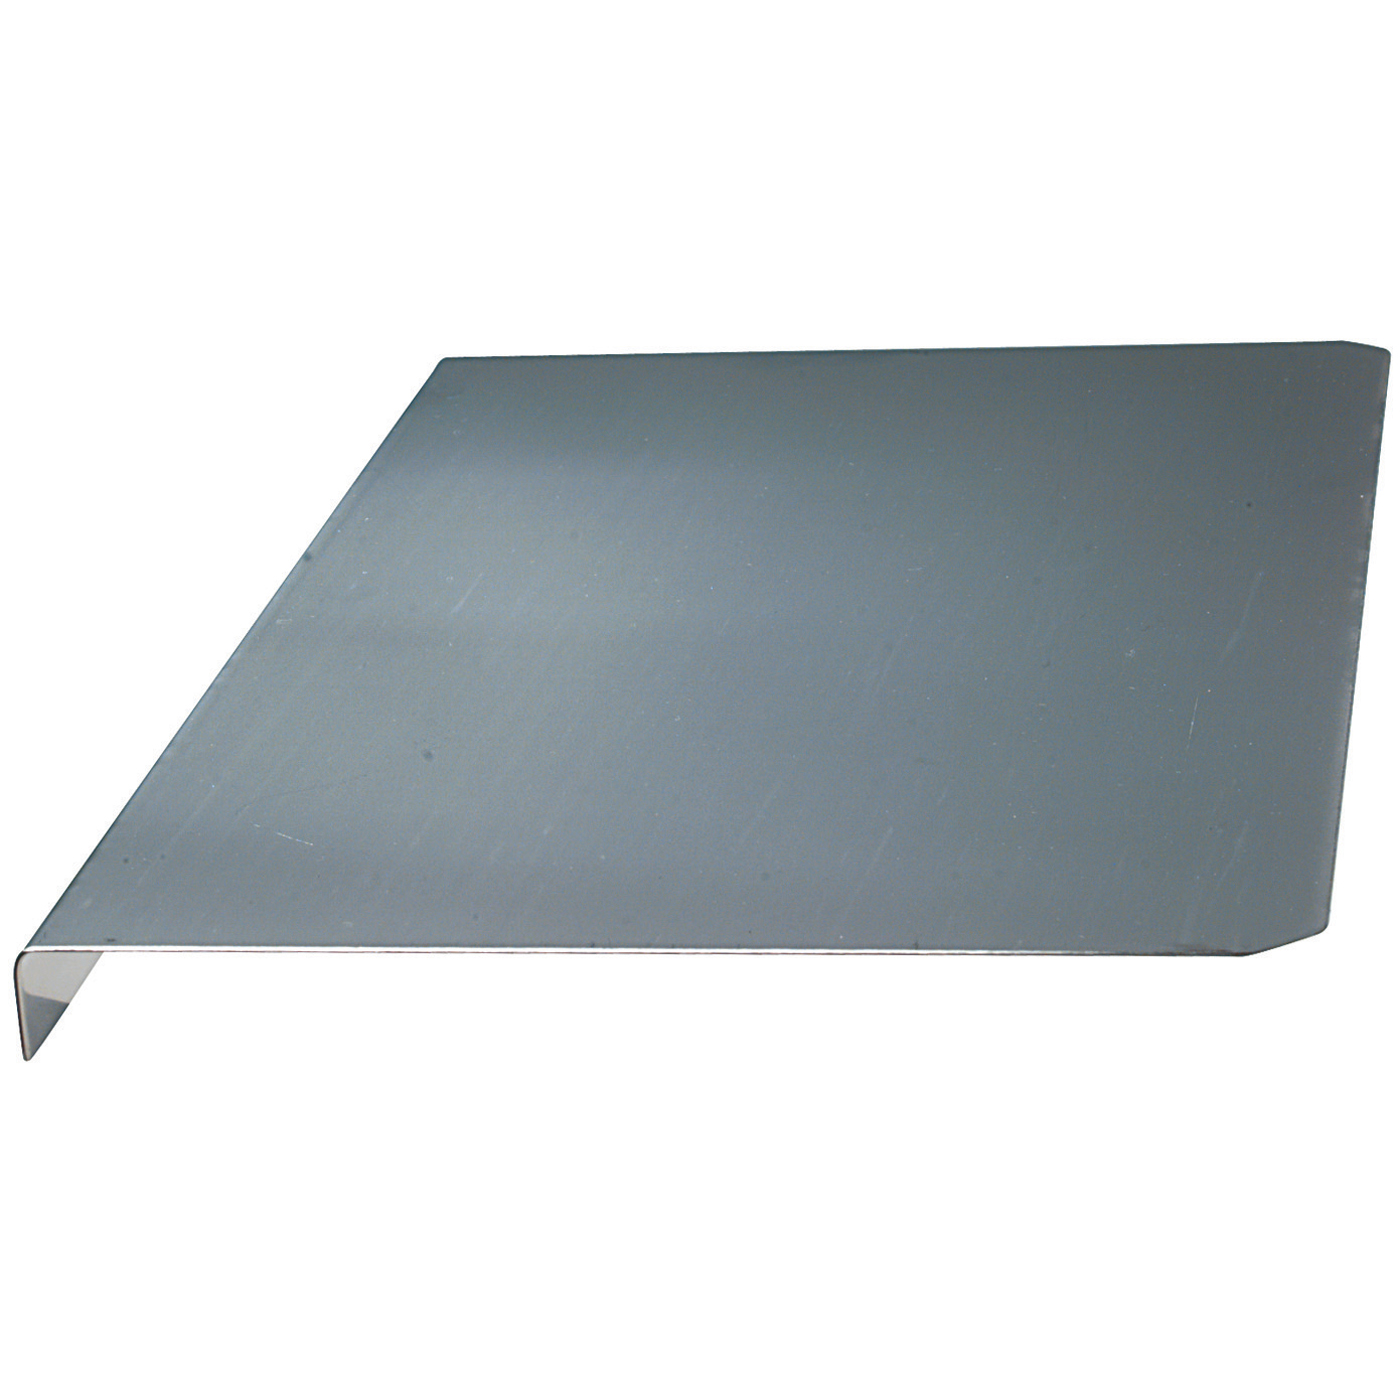 FINO Protective Panel for Work Bench - 1 piece